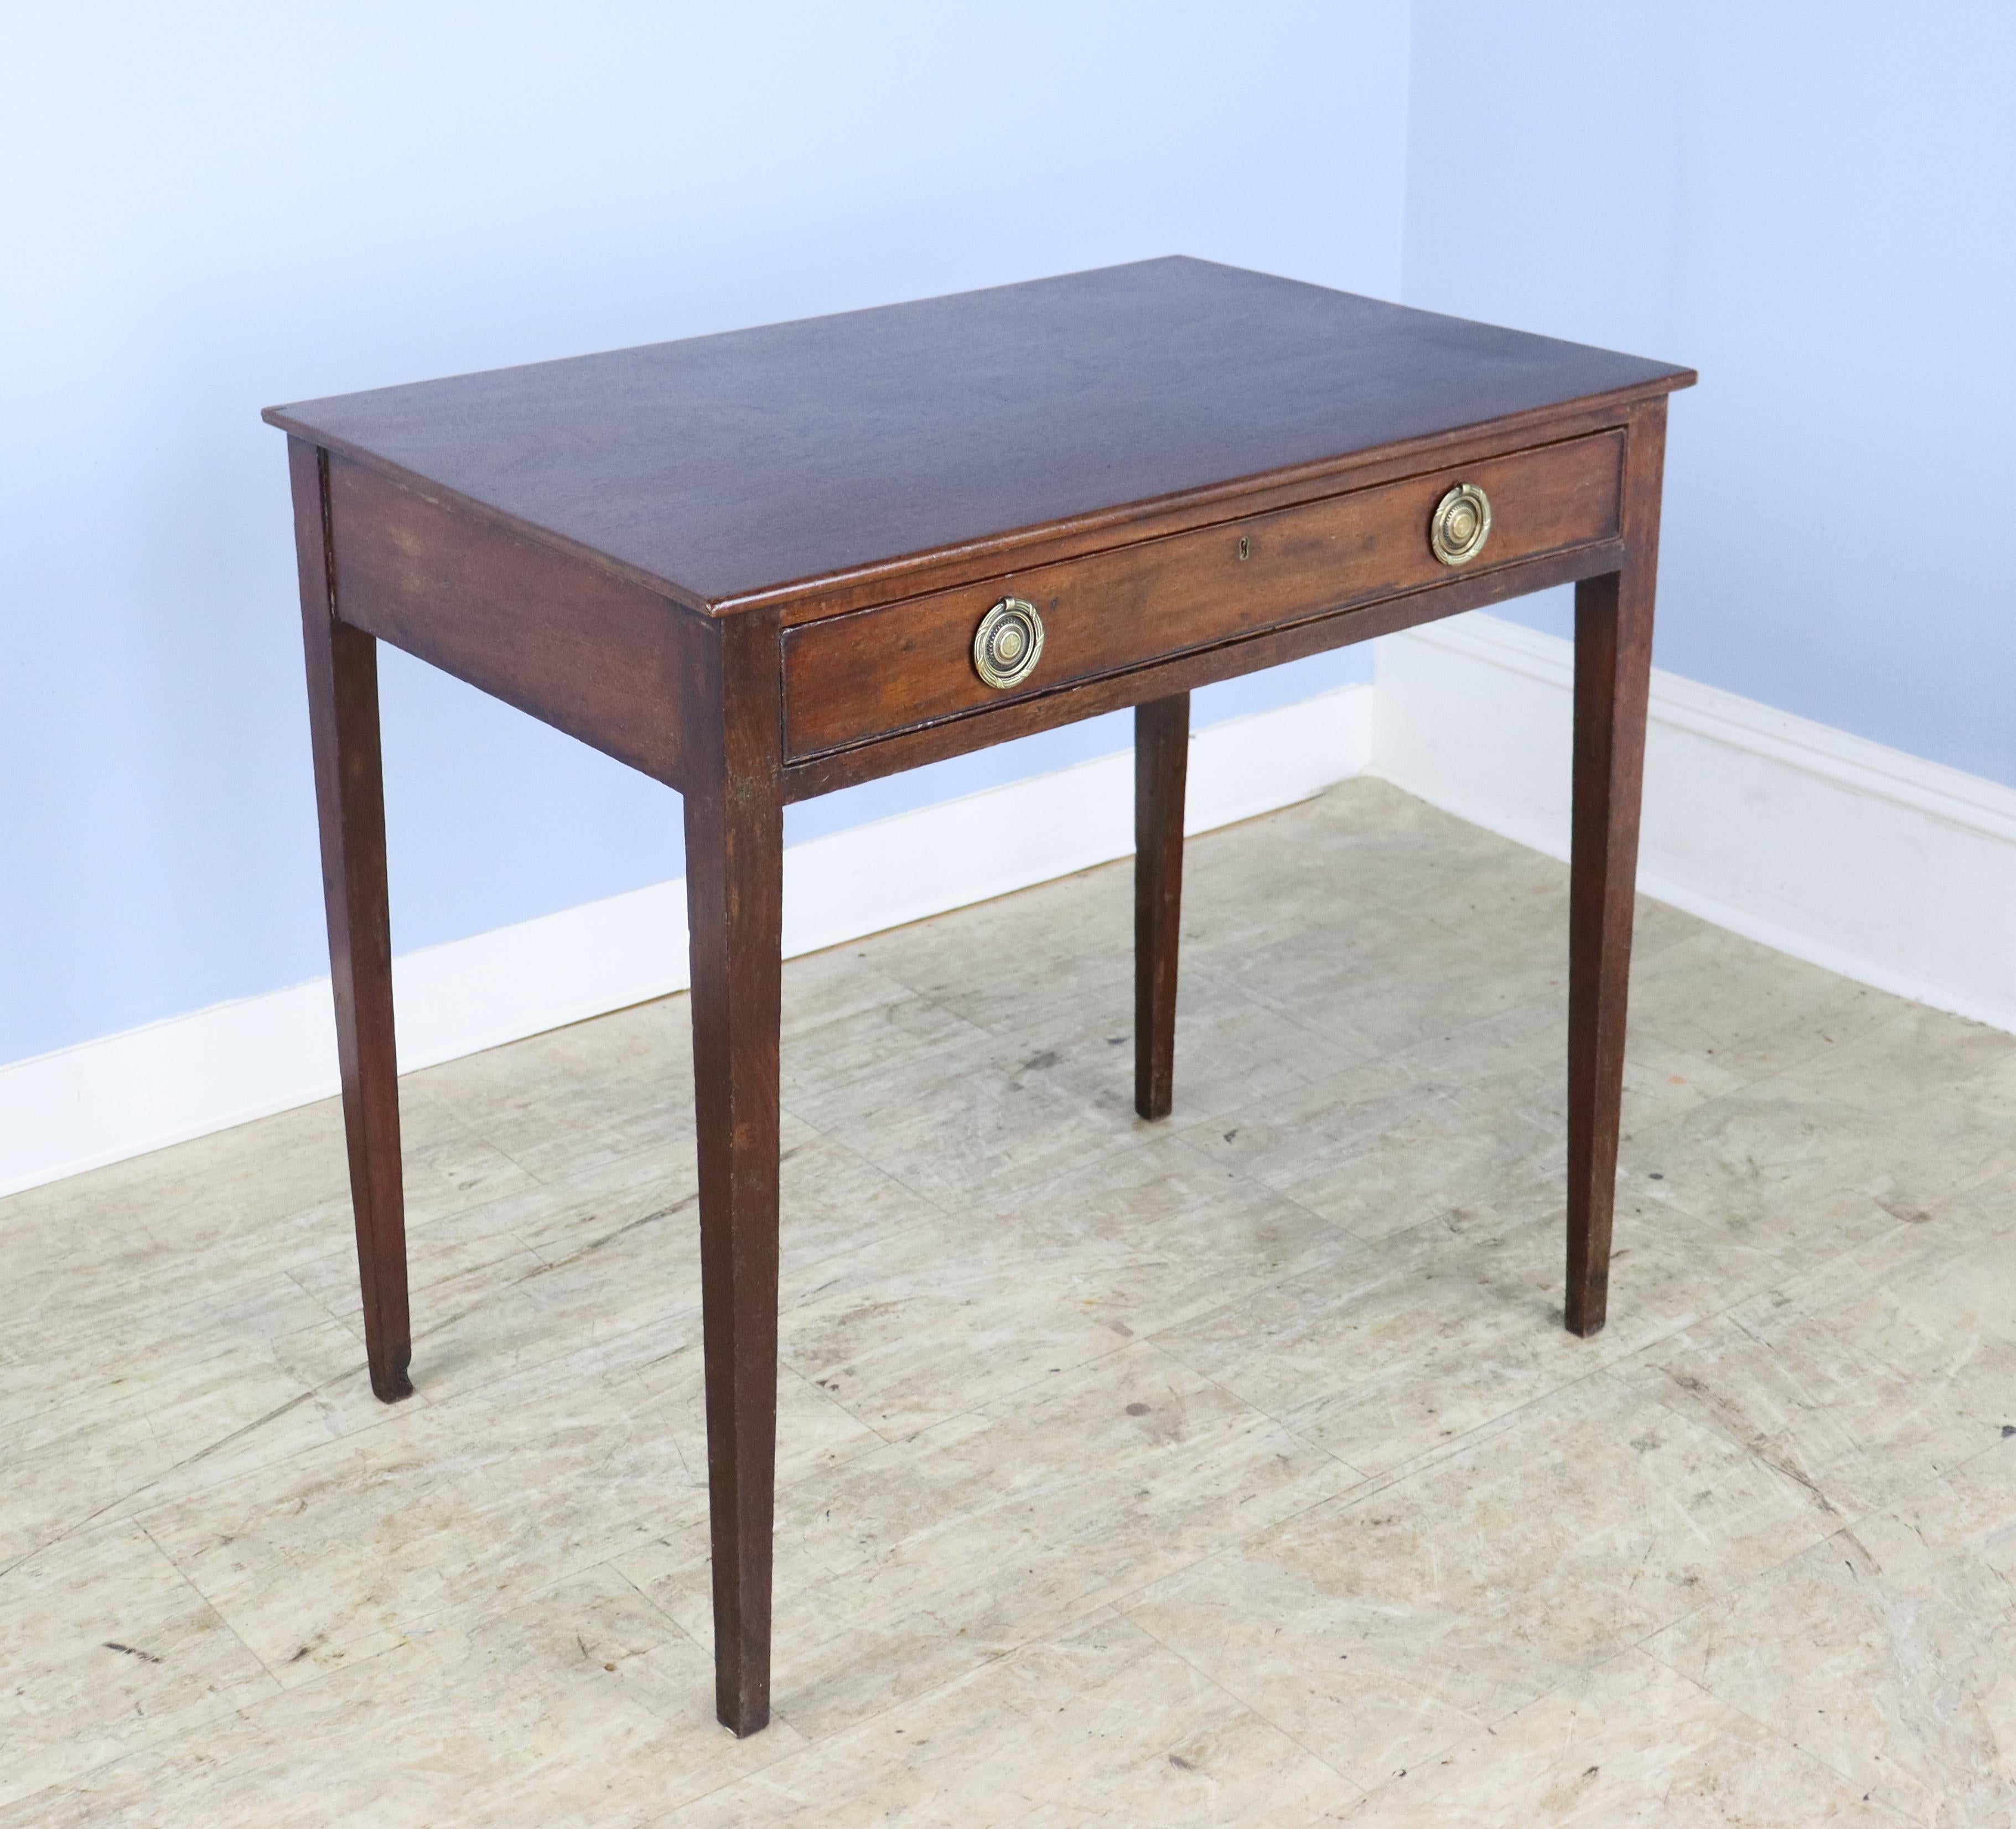 An antique occasional table from England. Classic Georgian shape. Mahogany with a rich grain and patina. One wide drawer with classic brass handles under carved edge. Would make a suitable lamp table. Top has been lightly refinished. but there is